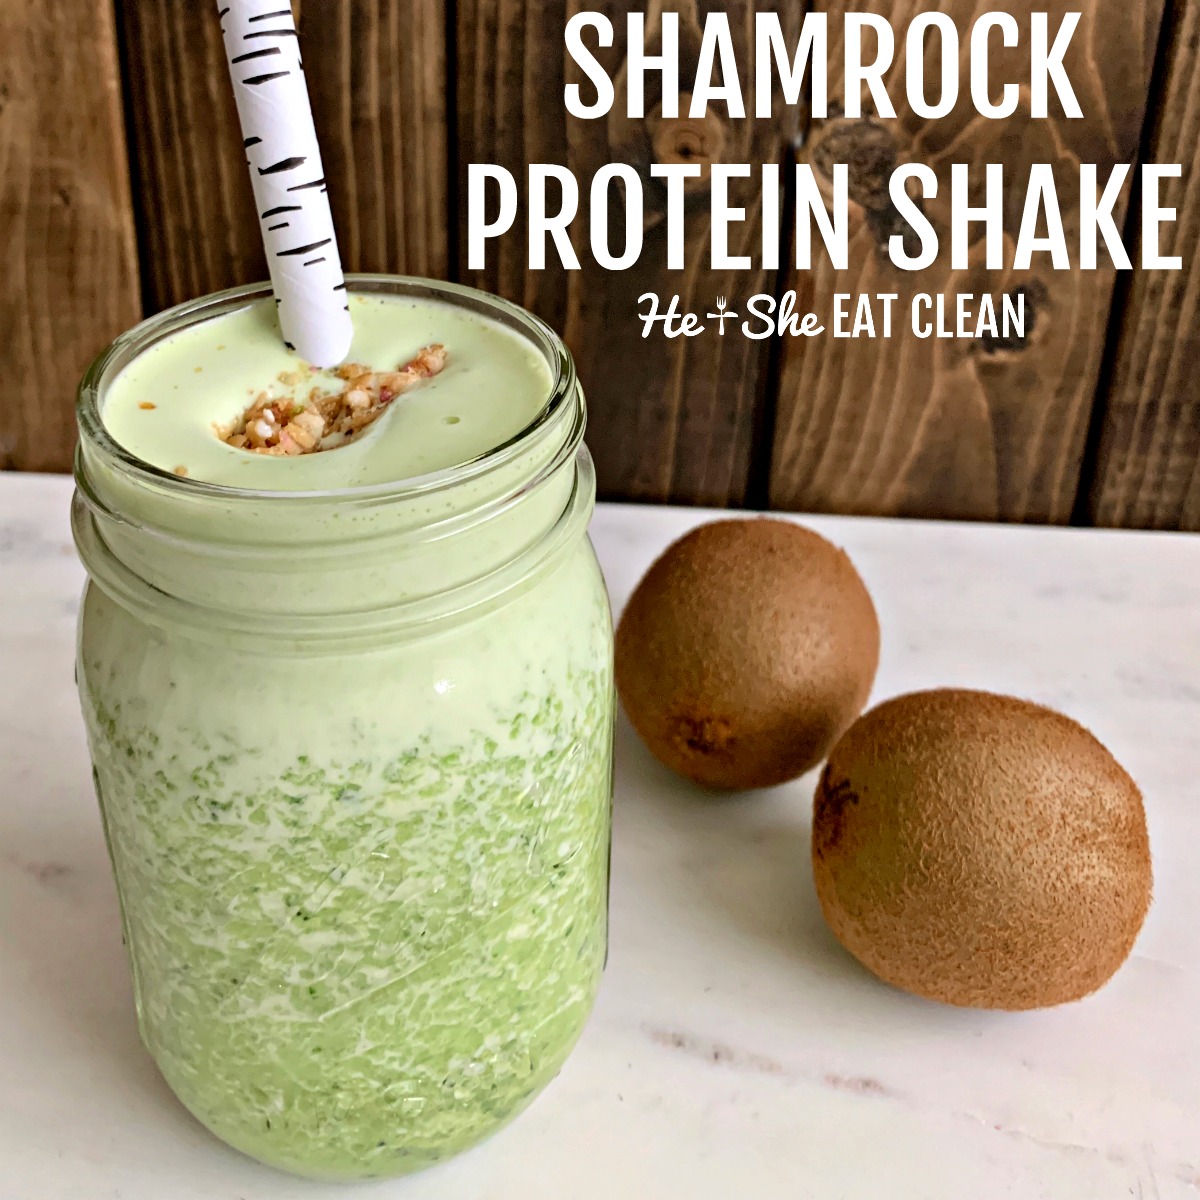 https://www.heandsheeatclean.com/wp-content/uploads/2015/03/shamrock-protein-shake-he-and-she-eat-clean-healthy-recipe.jpg